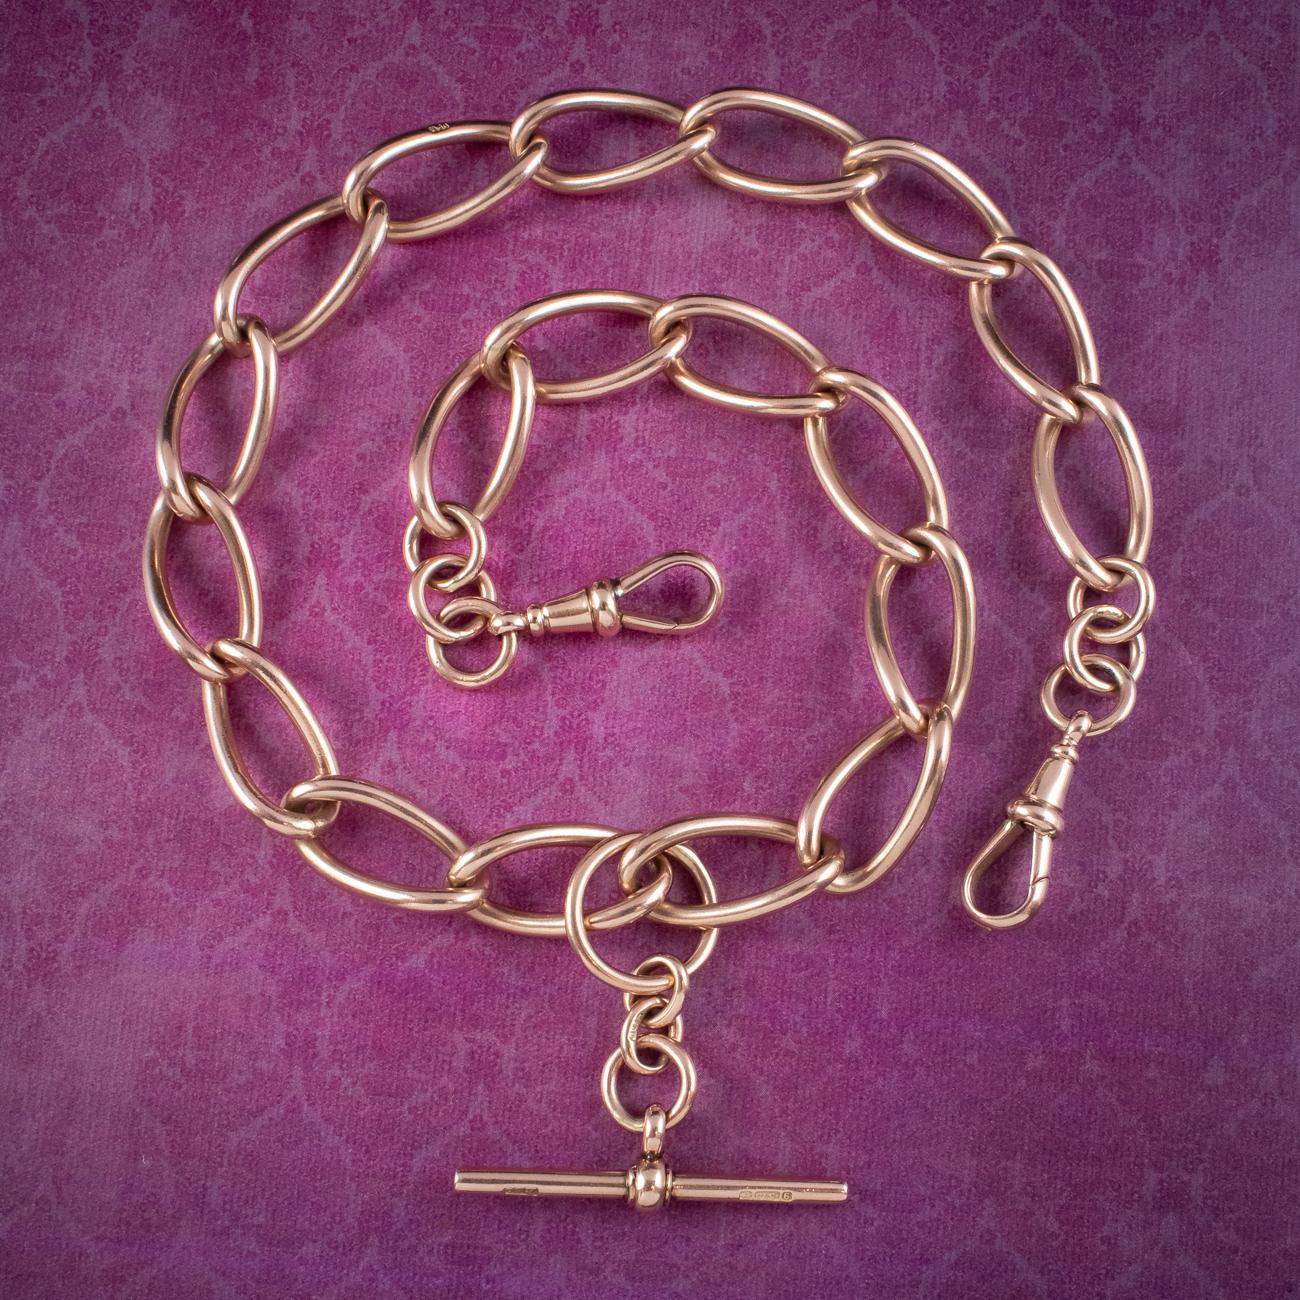 A grand antique Edwardian Albert chain from the early 1900s made up of solid 9ct gold curb links that have a lovely smoothness and strong rosy hue, each stamped “375/ 9ct”.

Albert chains were popularised and named after Prince Albert, Queen